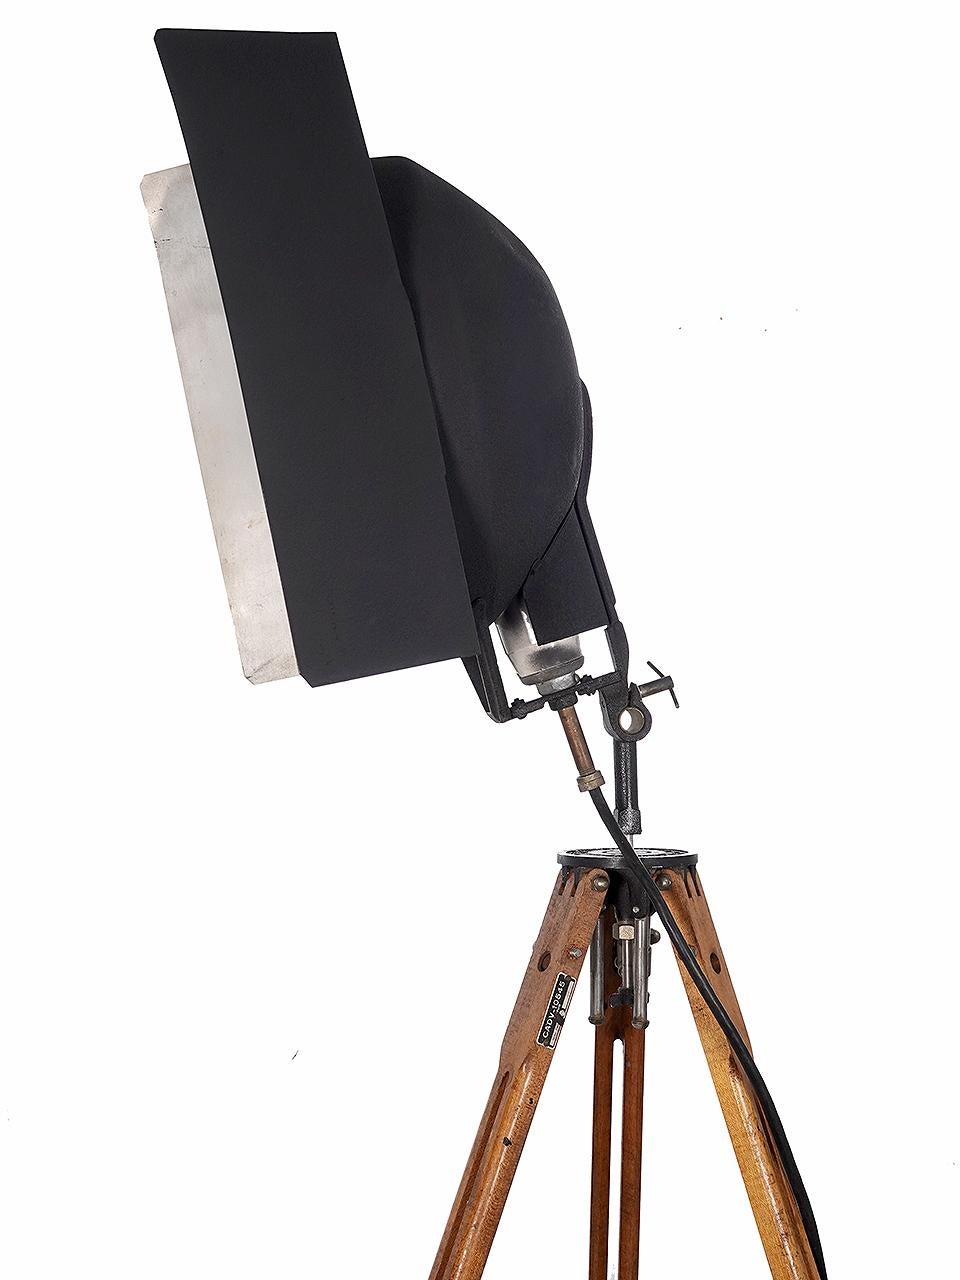 This is a wonderful looking industrial floor lamp. The original aluminum photographers flood light still has the articulating barn doors. The lamp is jointed so it tilts. The tripod is good one with that can be set to different heights. The wood